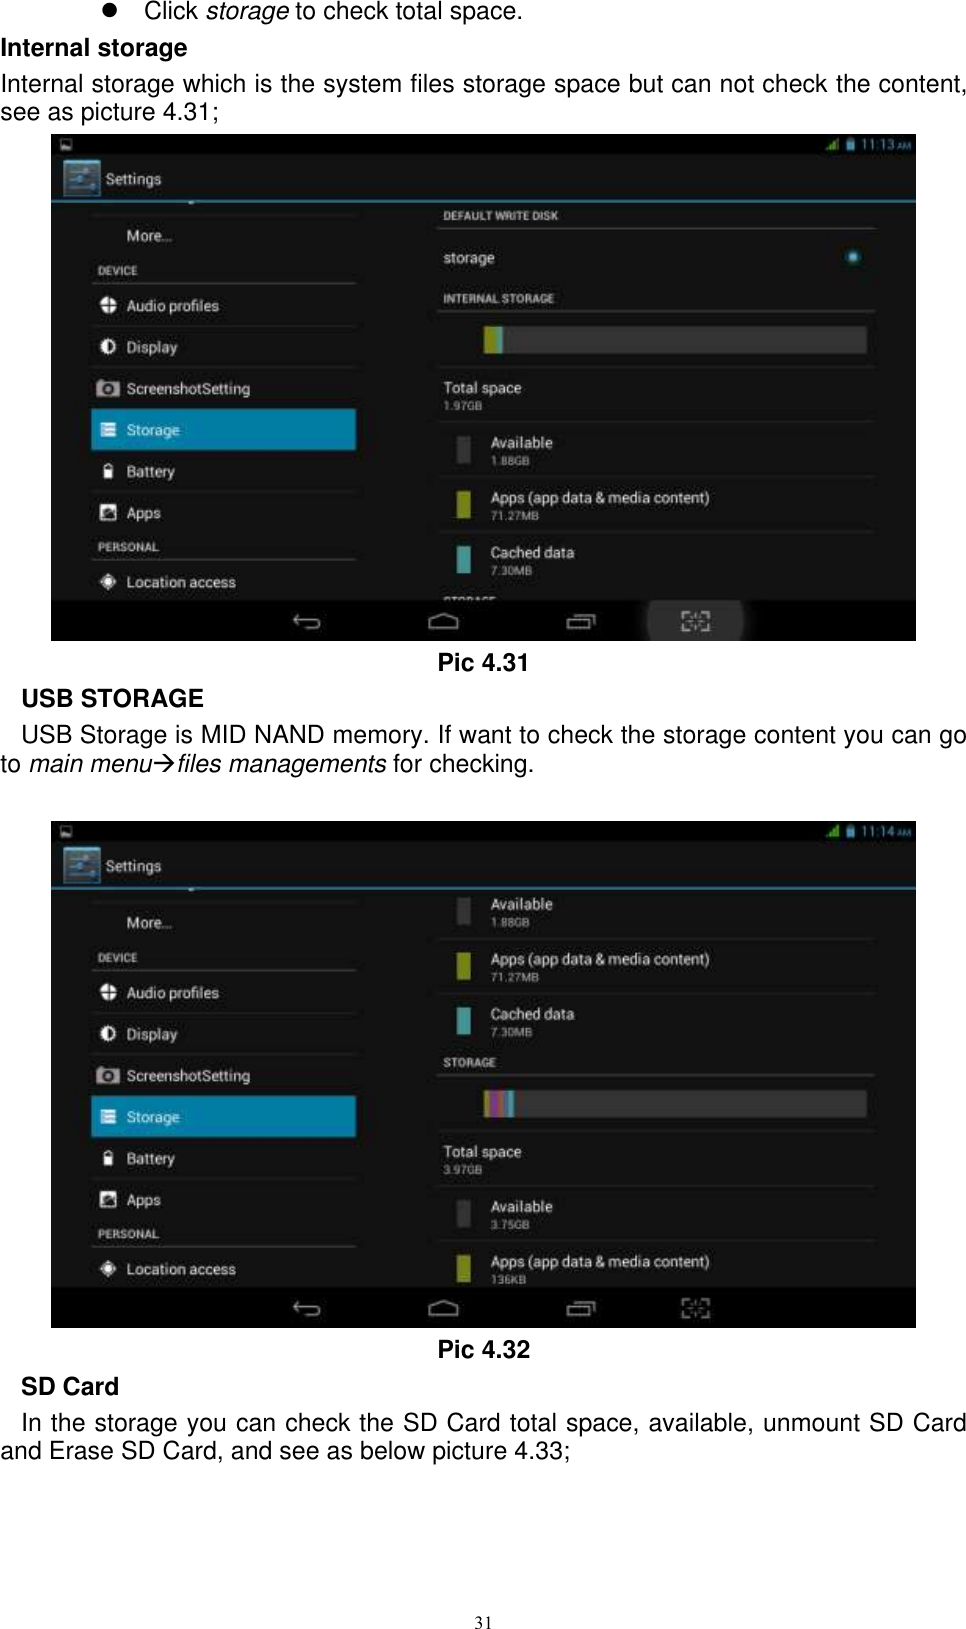      31   Click storage to check total space. Internal storage Internal storage which is the system files storage space but can not check the content, see as picture 4.31;  Pic 4.31 USB STORAGE USB Storage is MID NAND memory. If want to check the storage content you can go to main menufiles managements for checking.   Pic 4.32 SD Card In the storage you can check the SD Card total space, available, unmount SD Card and Erase SD Card, and see as below picture 4.33; 